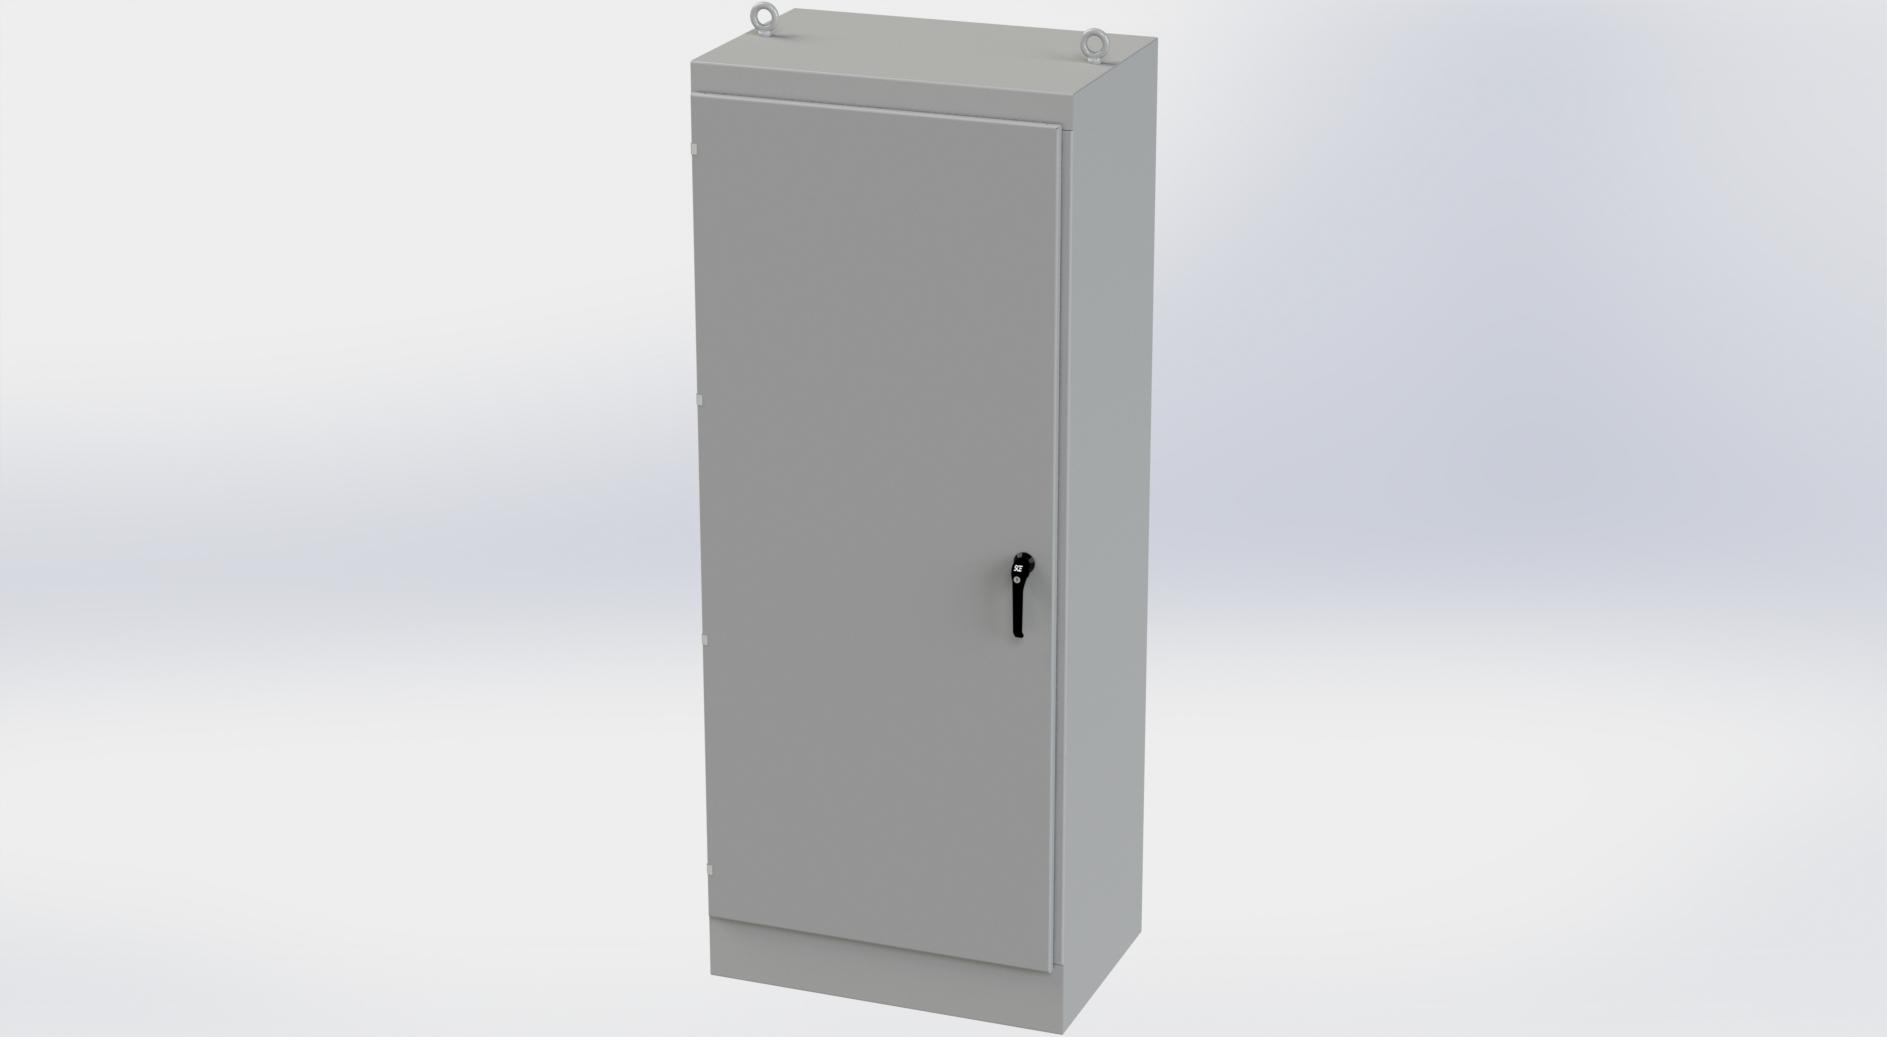 Saginaw Control SCE-903624FS FS Enclosure, Height:90.00", Width:36.00", Depth:24.00", ANSI-61 gray powder coat inside and out. Optional sub-panels are powder coated white.